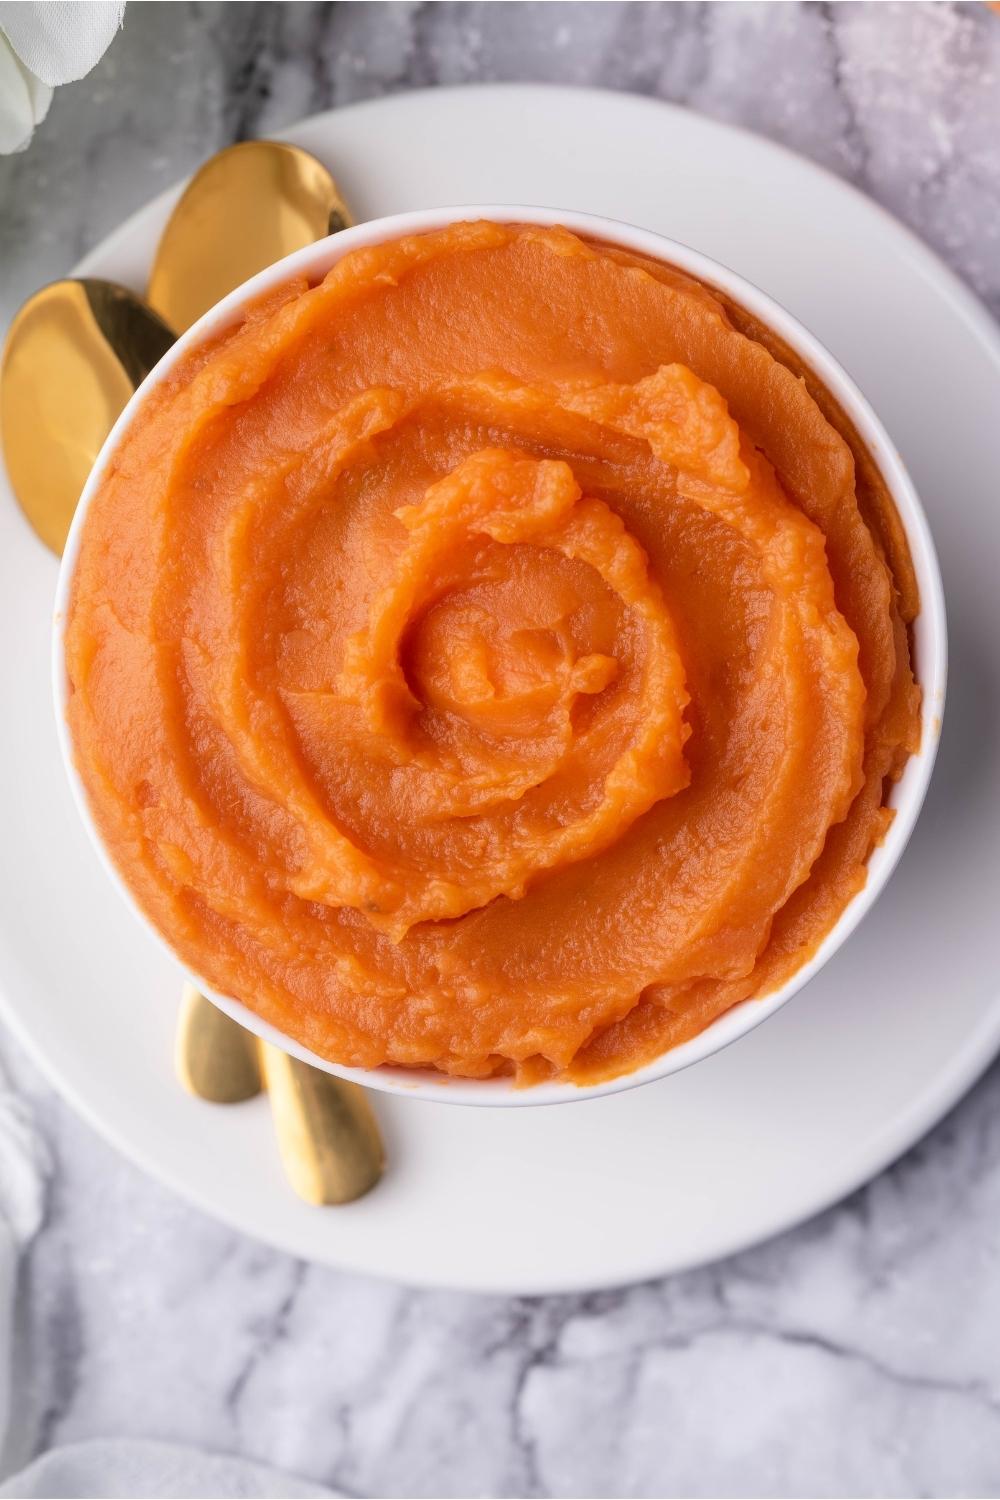 Sweet potato puree in a white bowl on a white plate with two spoons.